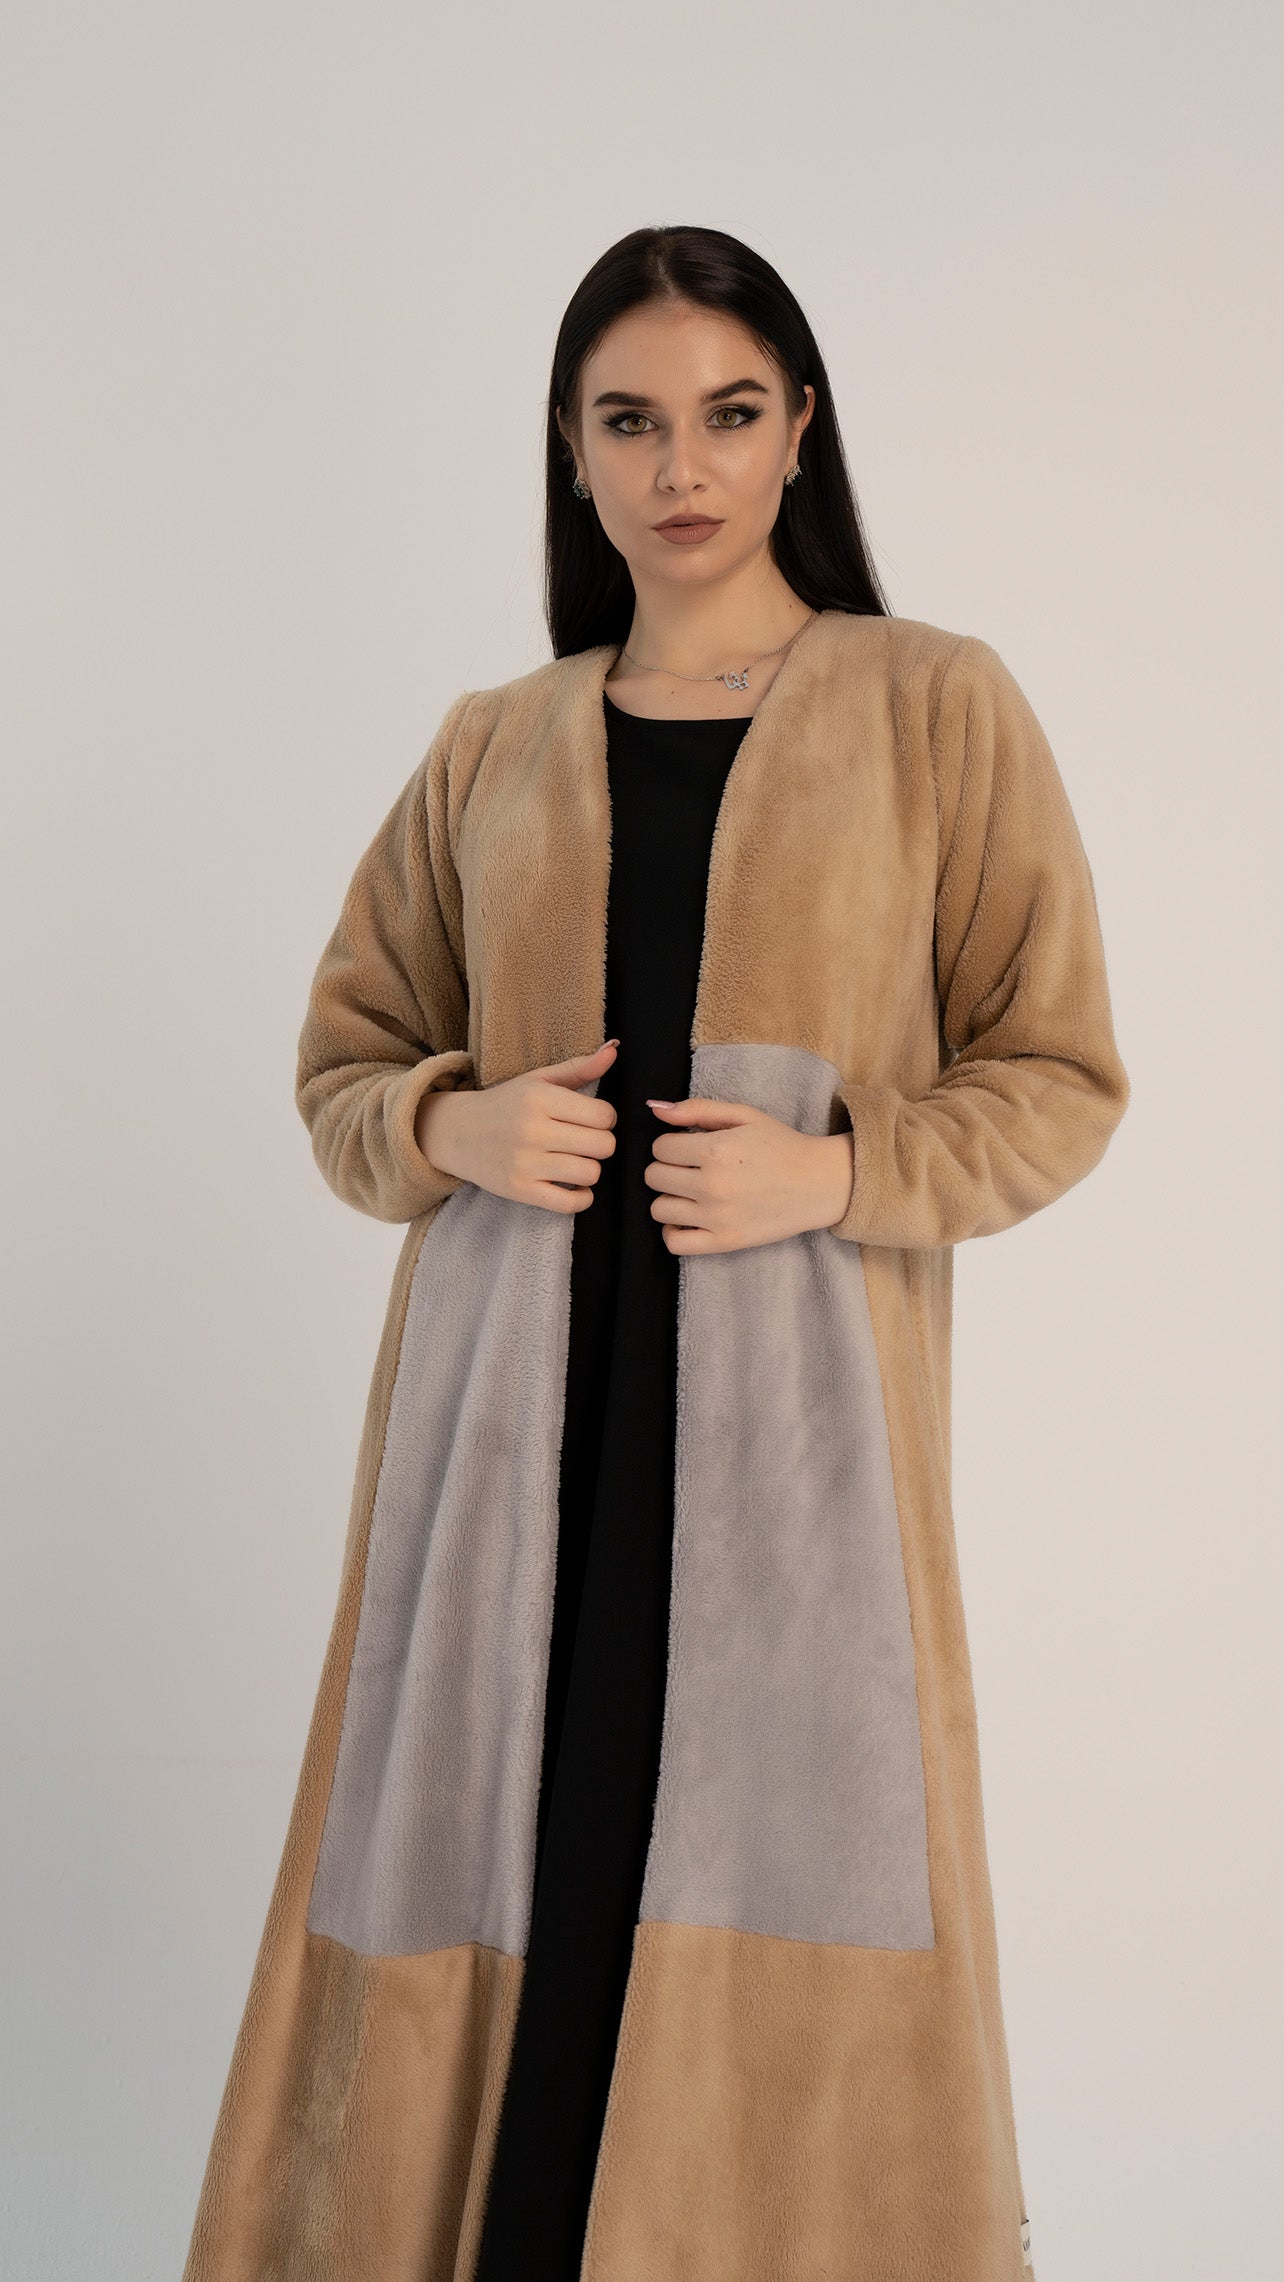 Girl wearing woolen abaya for women with color block pattern on front.